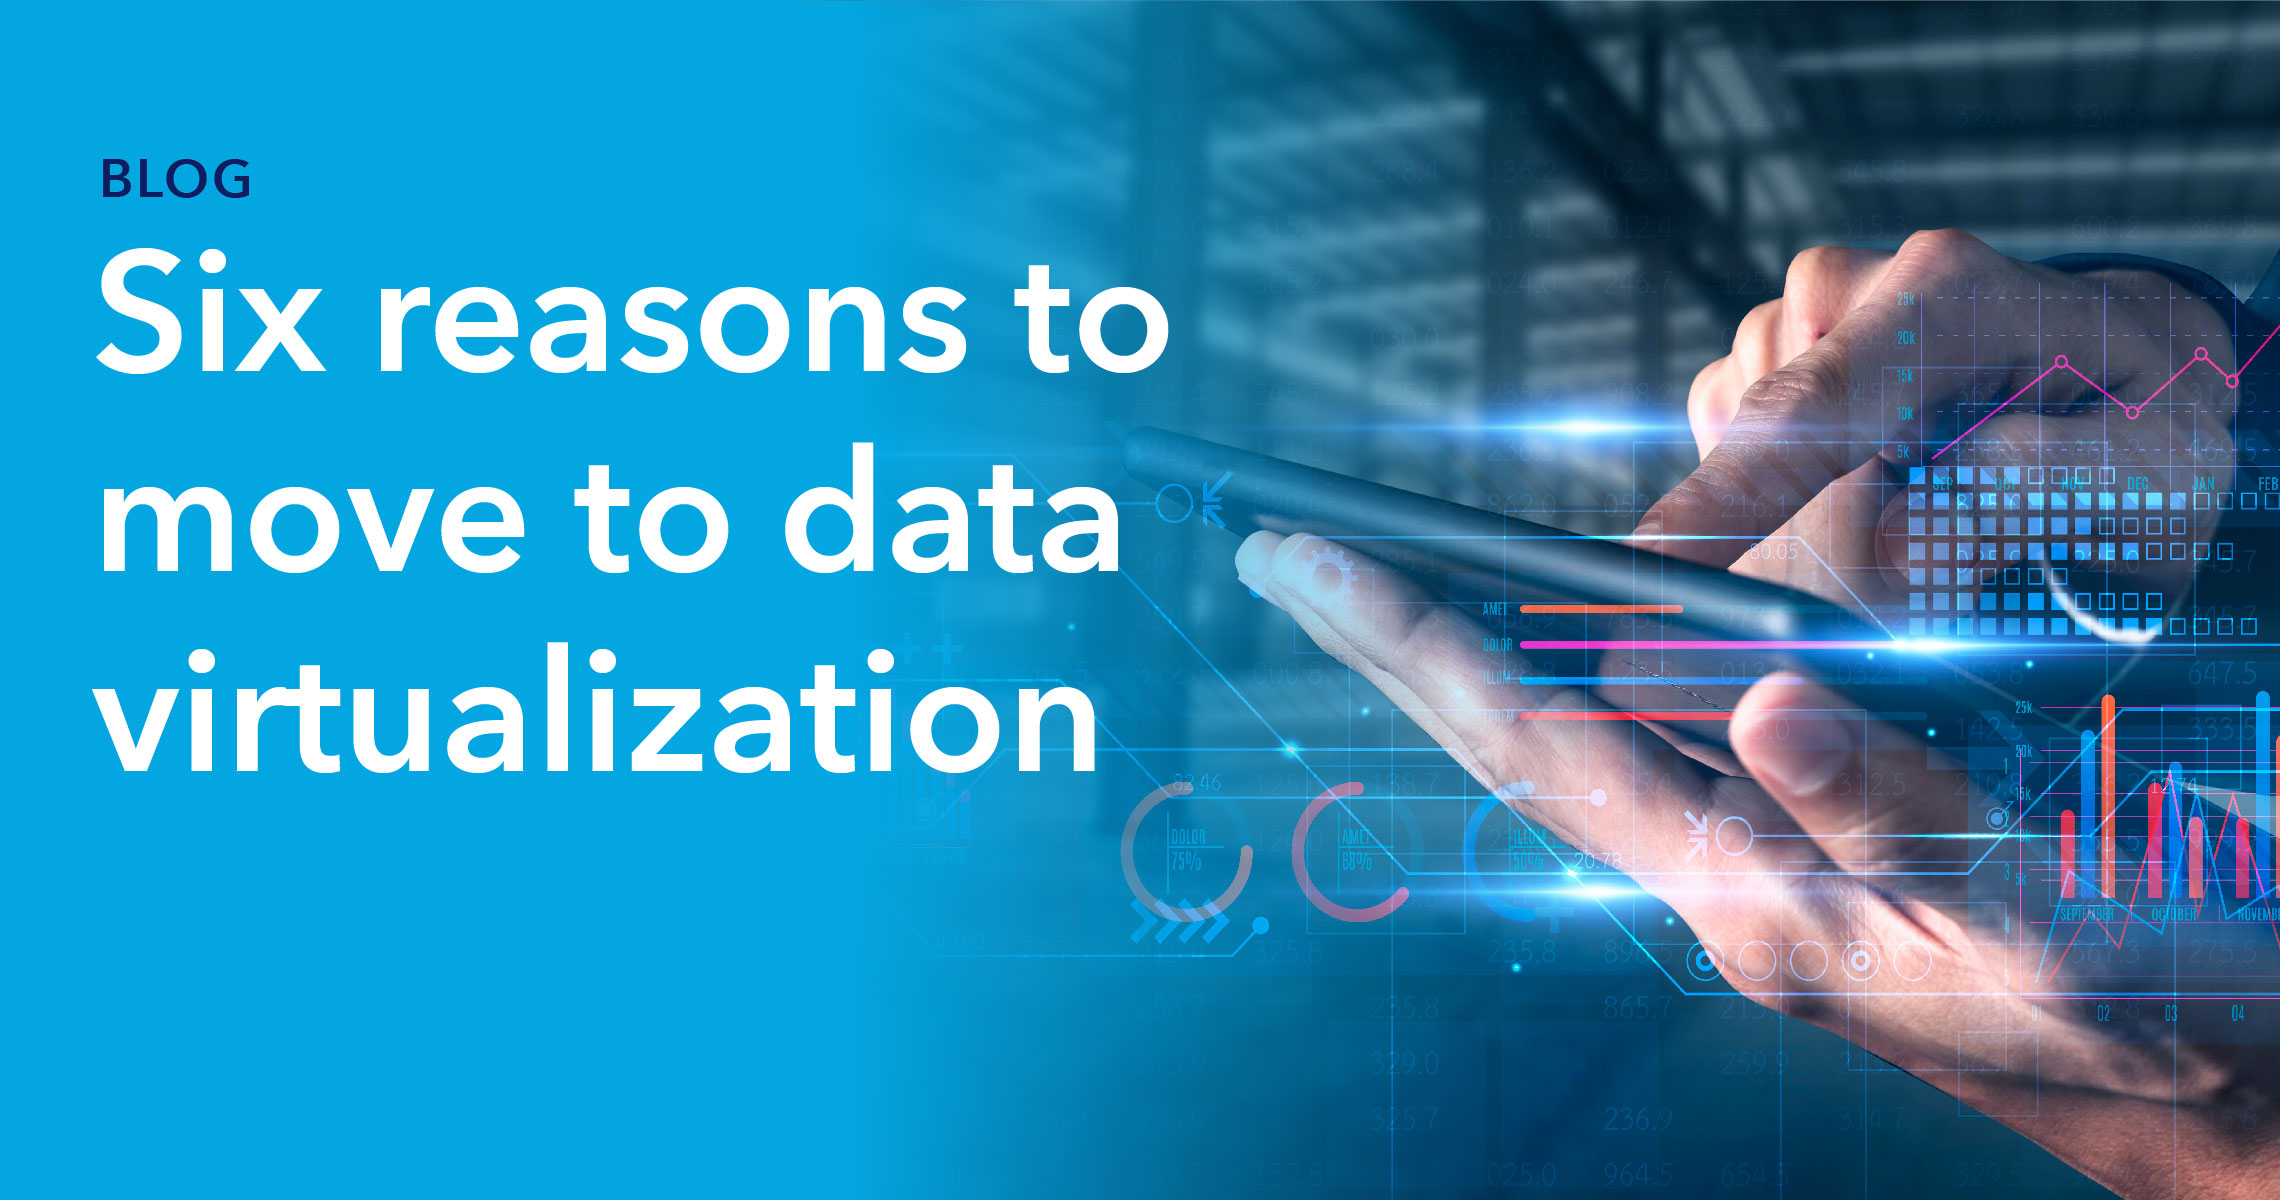 Blog header - six reasons to move to data virtualization